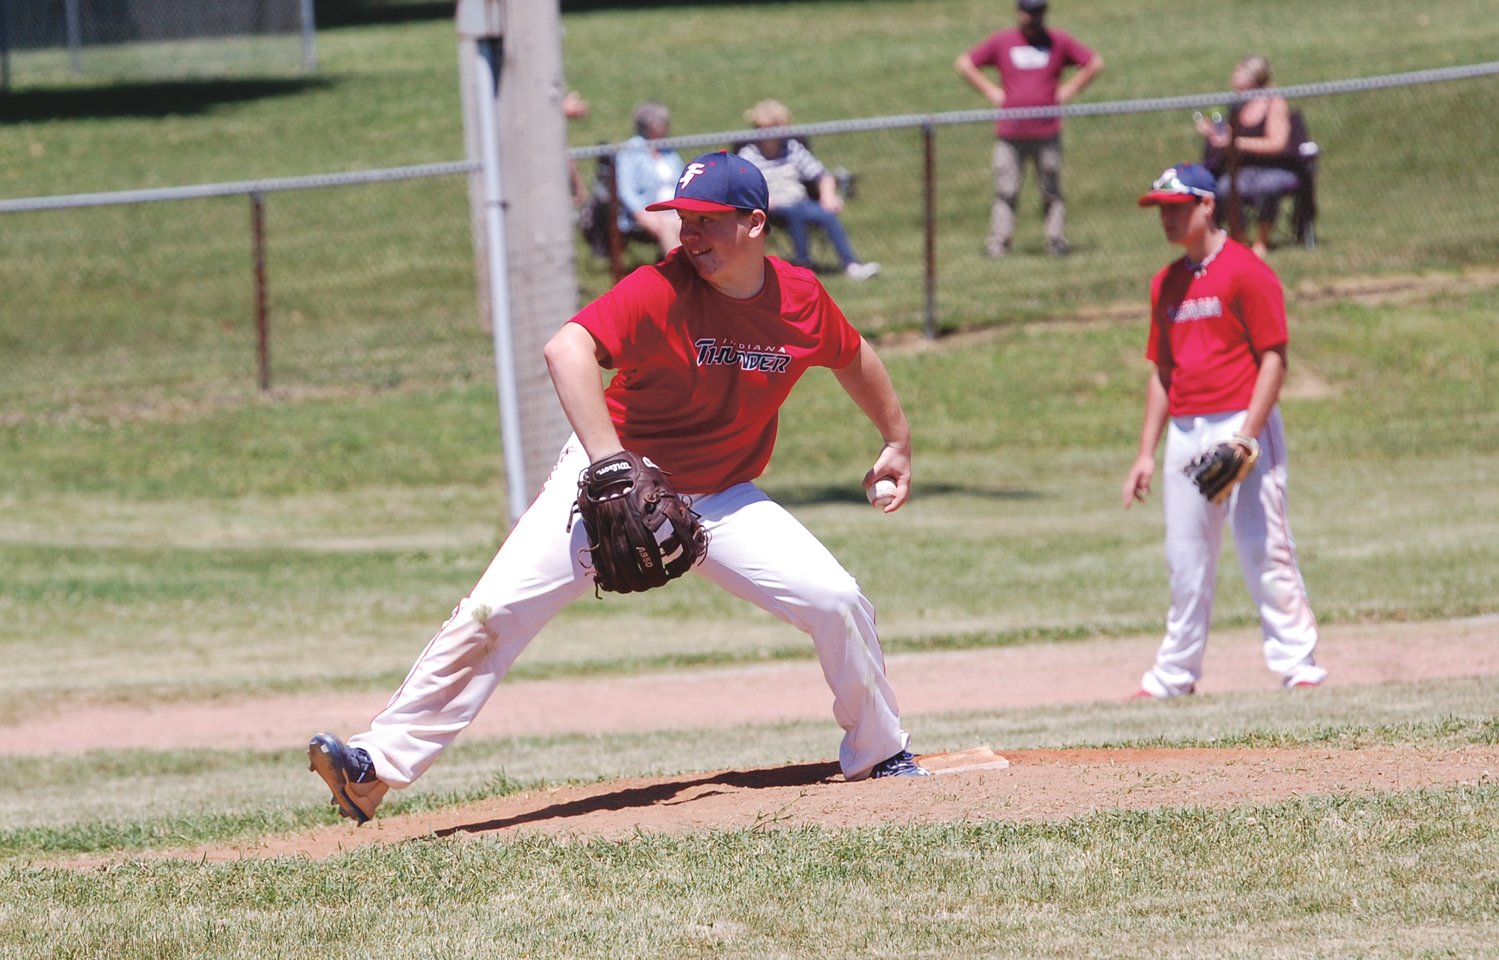 Ross Dyson fires a pitch home Sunday afternoon as the Indiana Thunder 14U team took on Harrison.